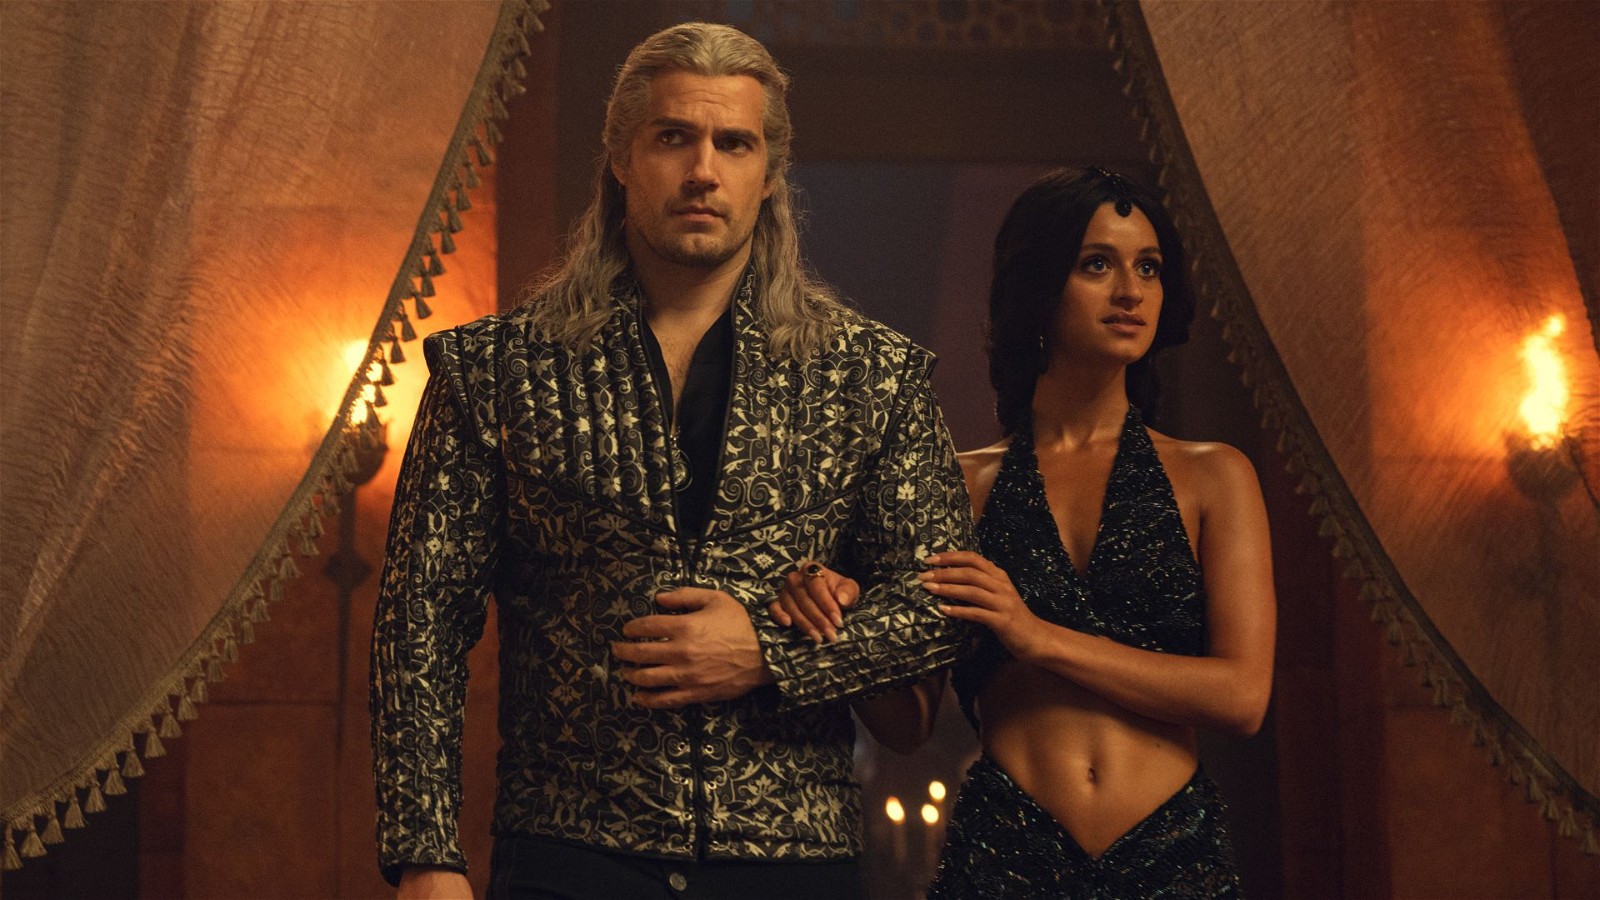 Anya Chalotra and Henry Cavill in The Witcher